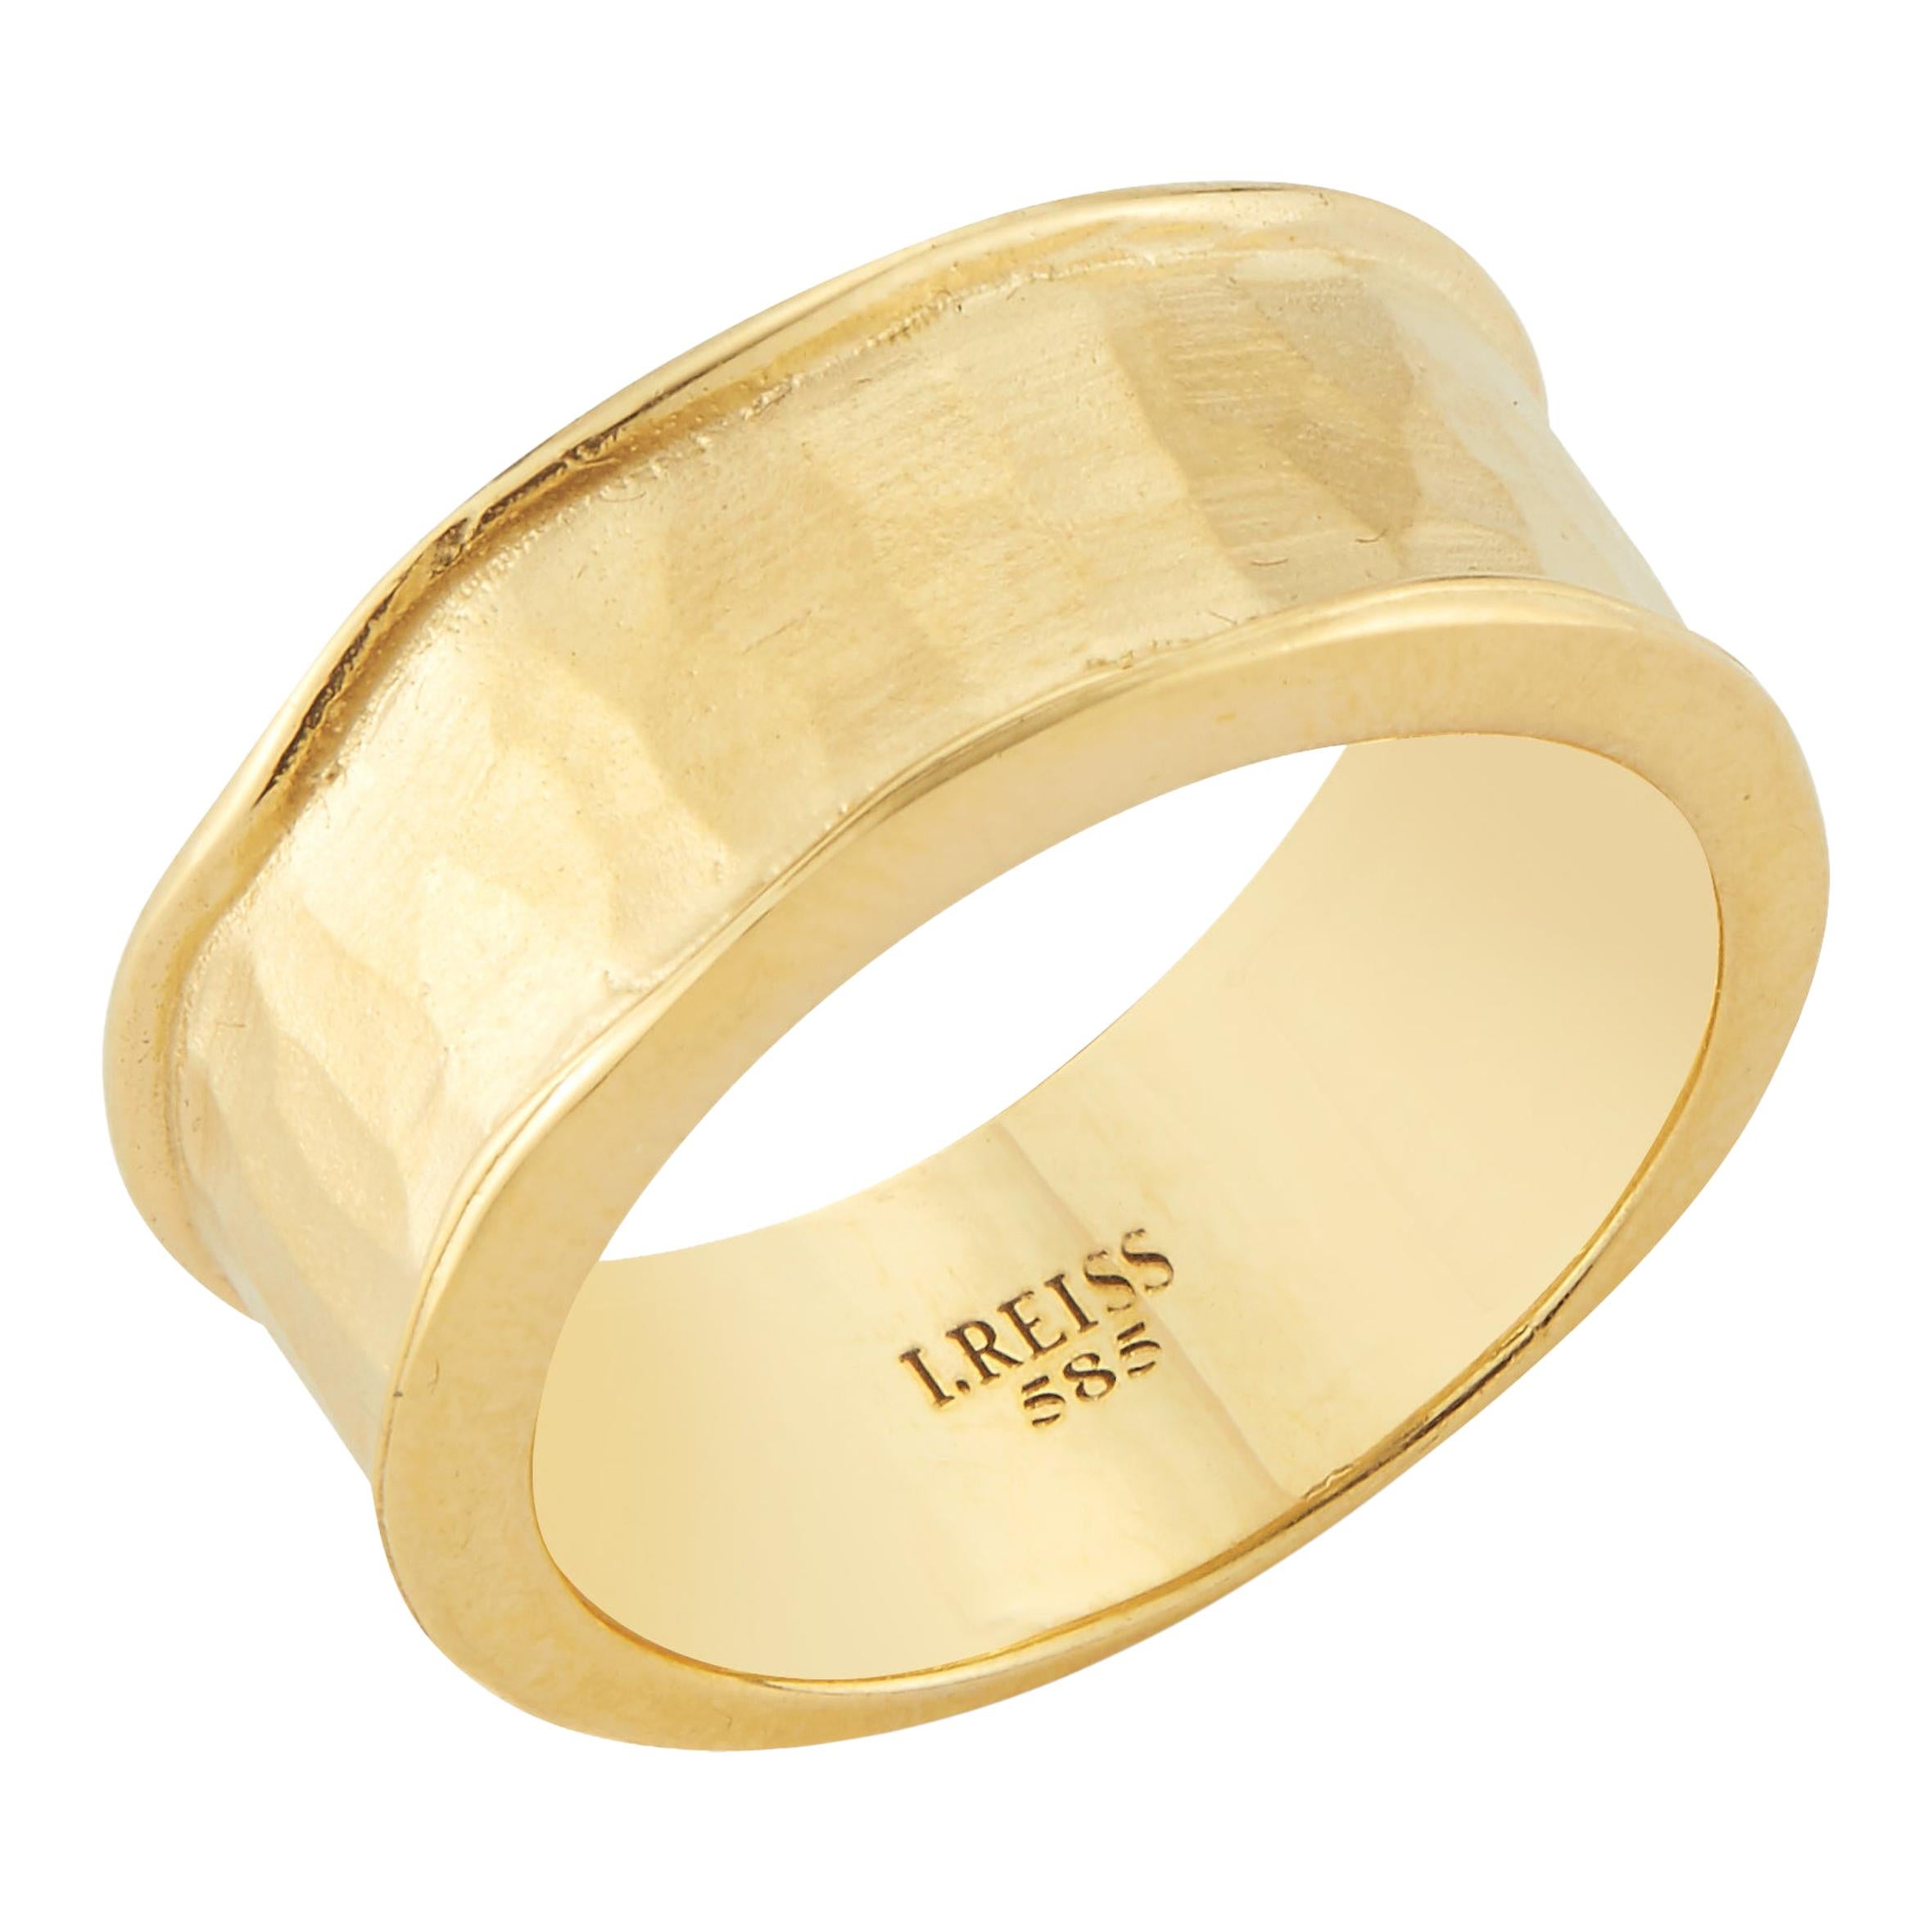 Hand-Crafted 14 Karat Yellow Gold Hammered Band Ring